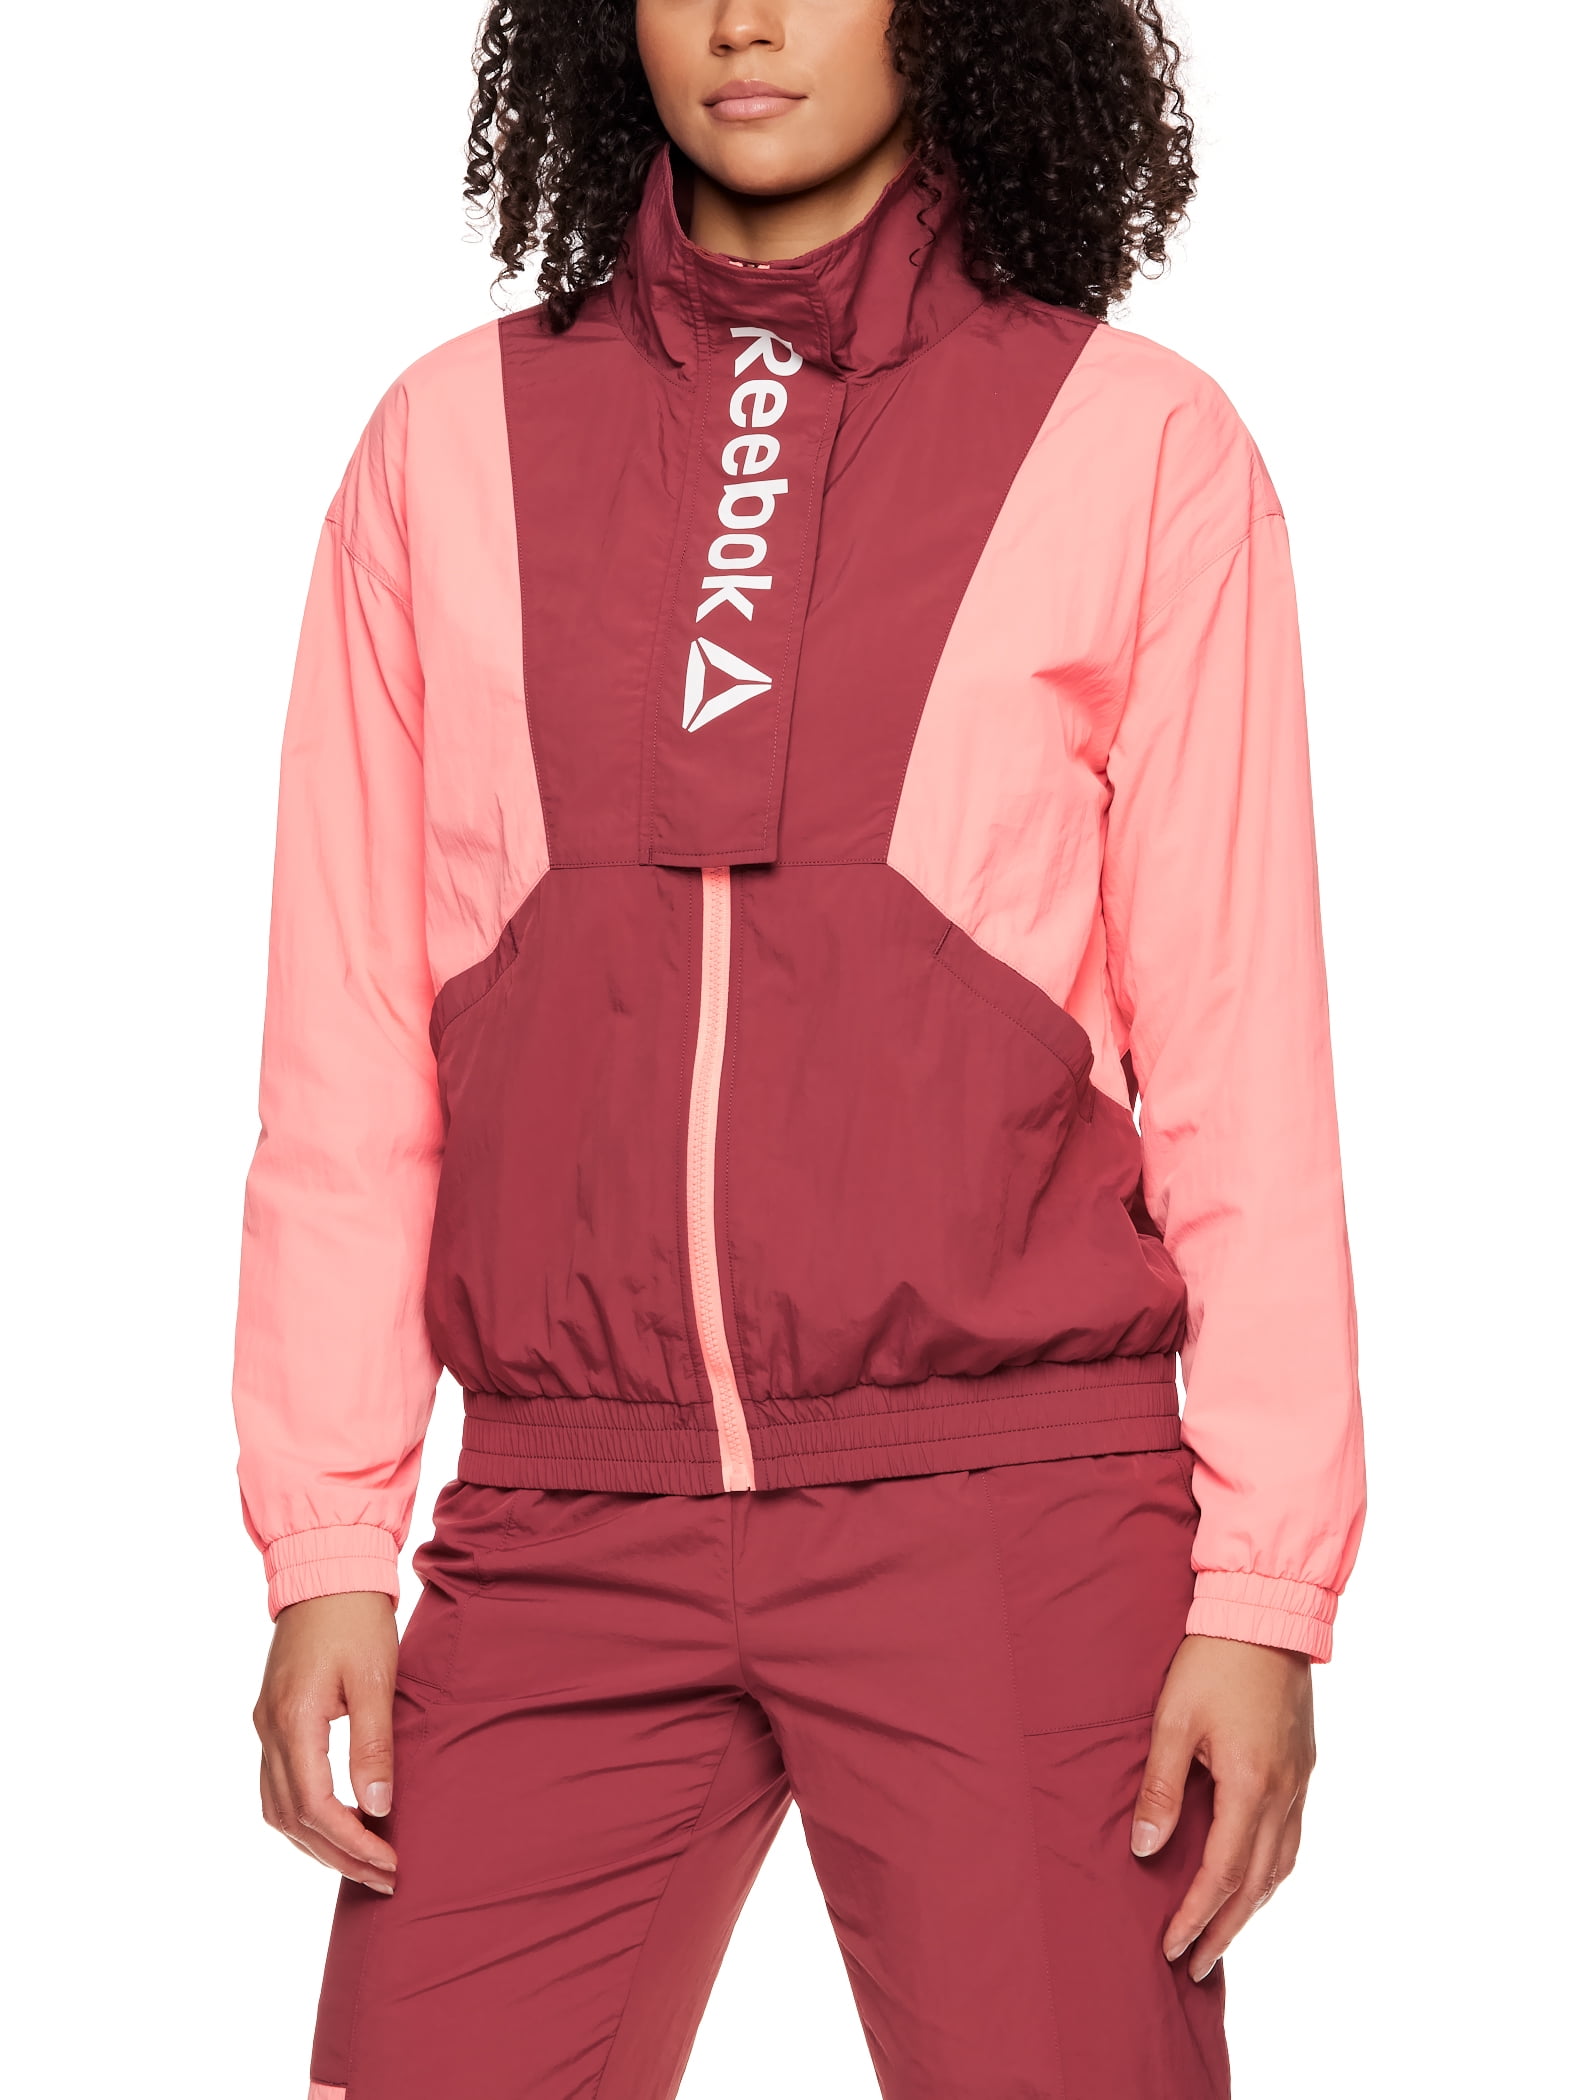 Women's Focus Track Jacket with Front Flap and Pockets - Walmart.com